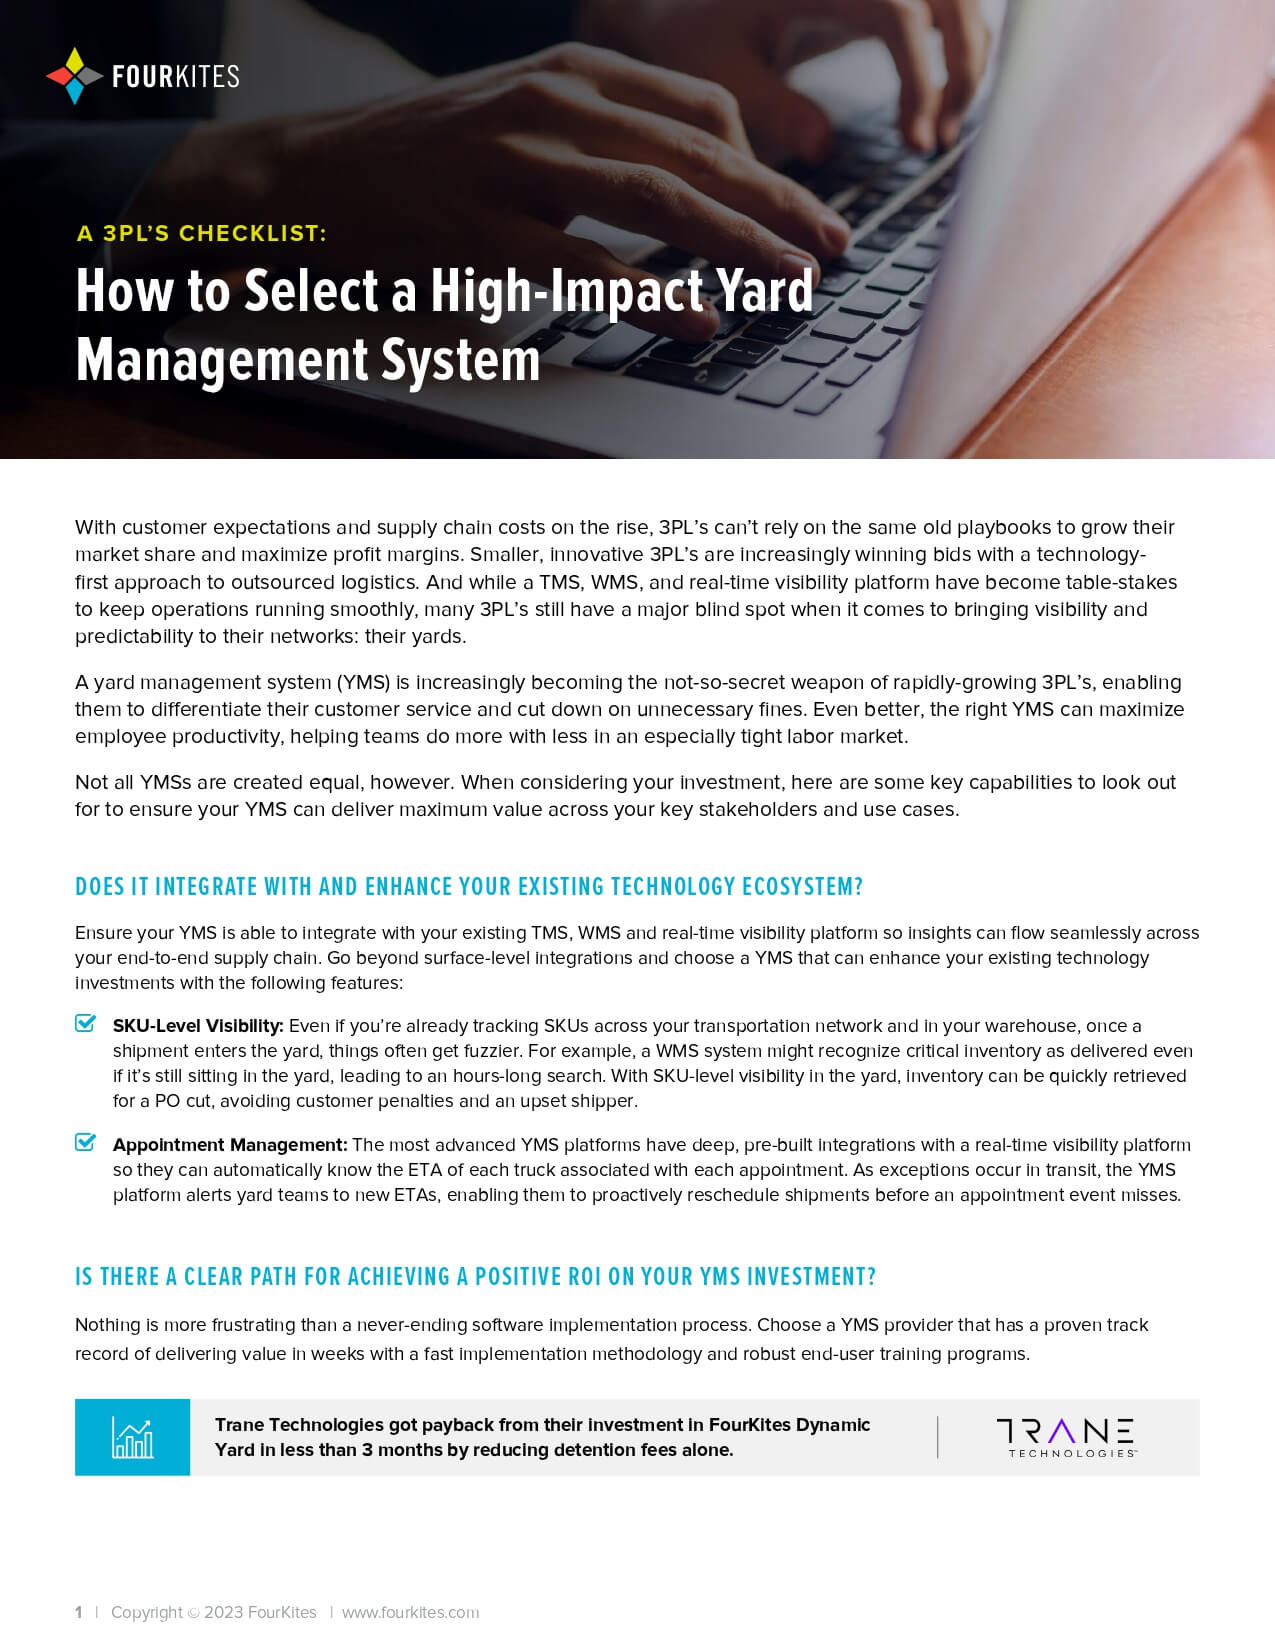 YMS Checklist Infographic on how to select a high-impact yard management system